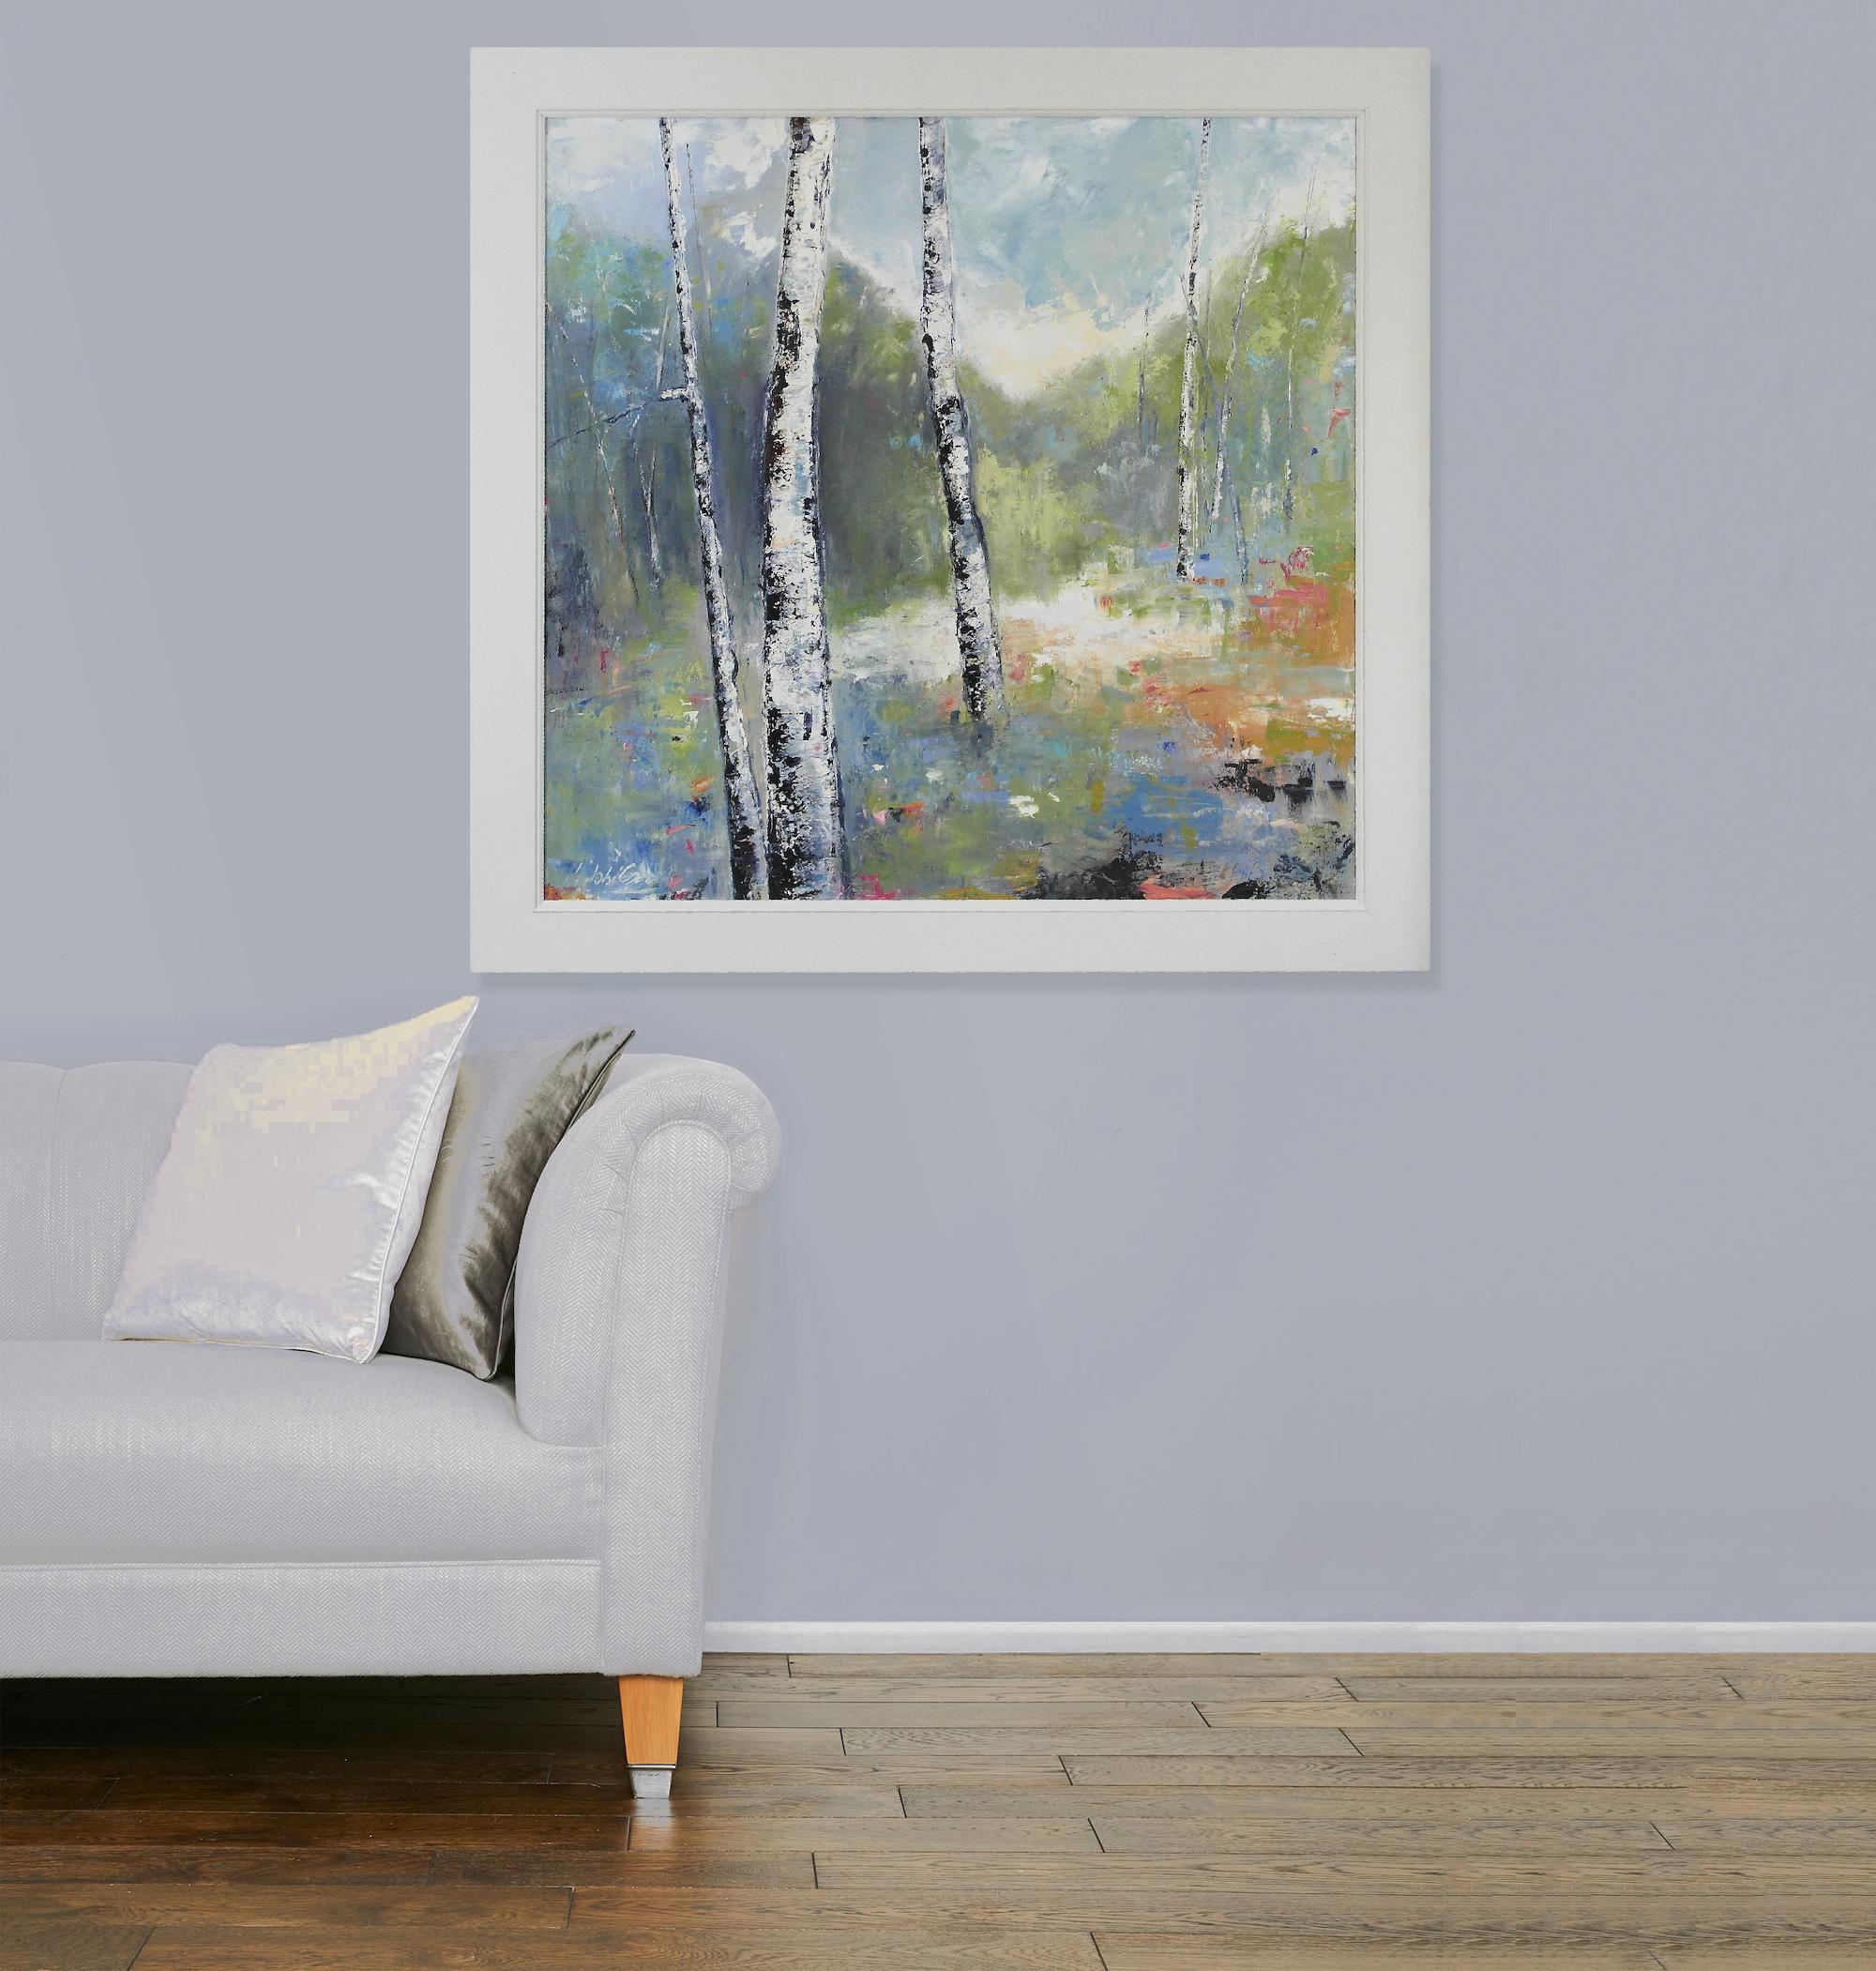 Libbi Gooch
Woodland Opening
Original Abstract Landscape Painting
Oil on Board
Canvas Size: 80 cm x 80 cm x .5 cm
Framed Size: 93 cm x 93 cm x 1.8 cm
Sold Framed
Free Shipping
Please note that in situ images are purely an indication of how a piece